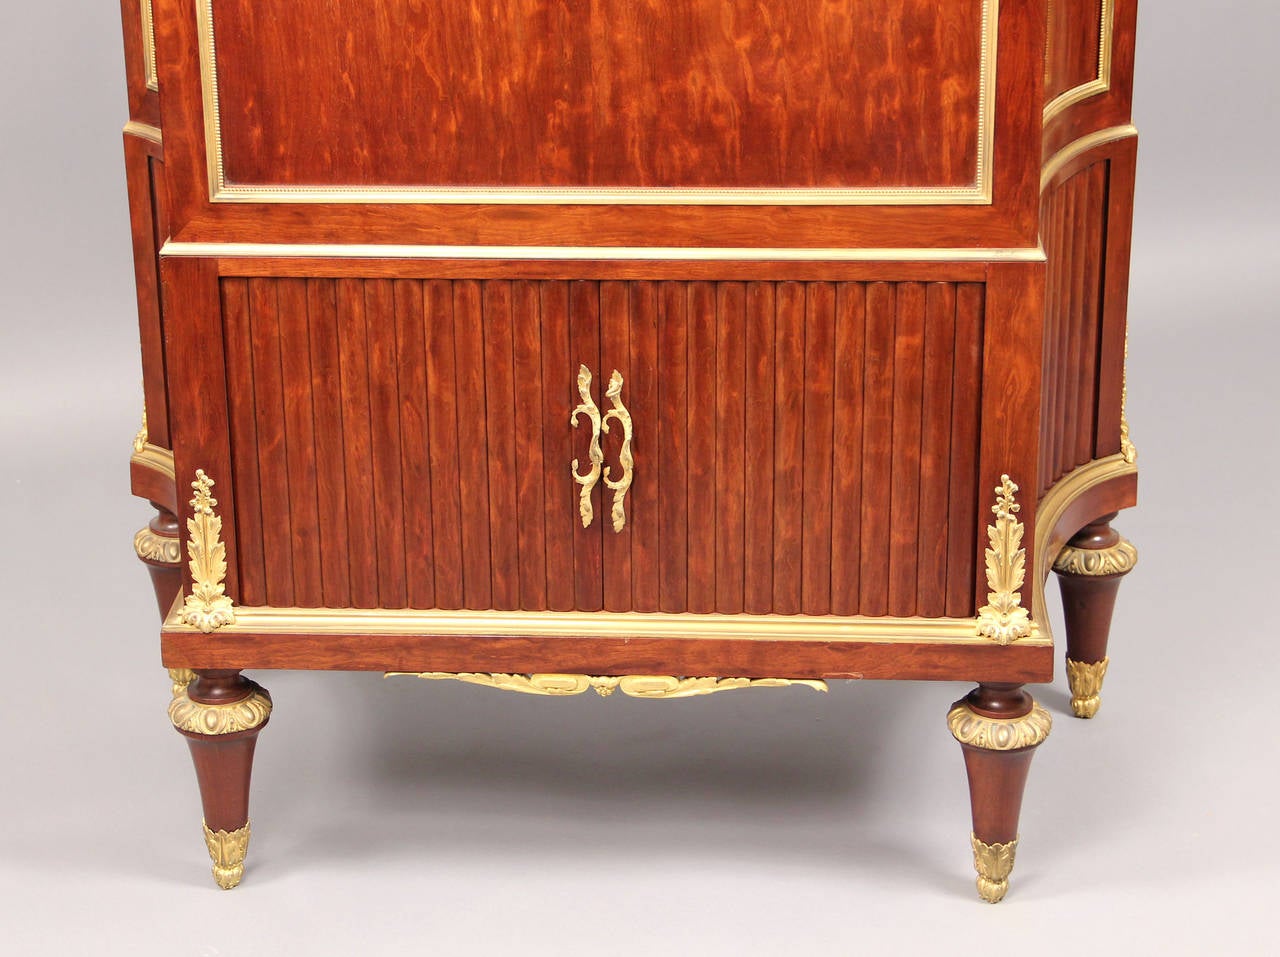 Late 19th Century Gilt Bronze-Mounted Cabinet by François Linke In Excellent Condition For Sale In New York, NY